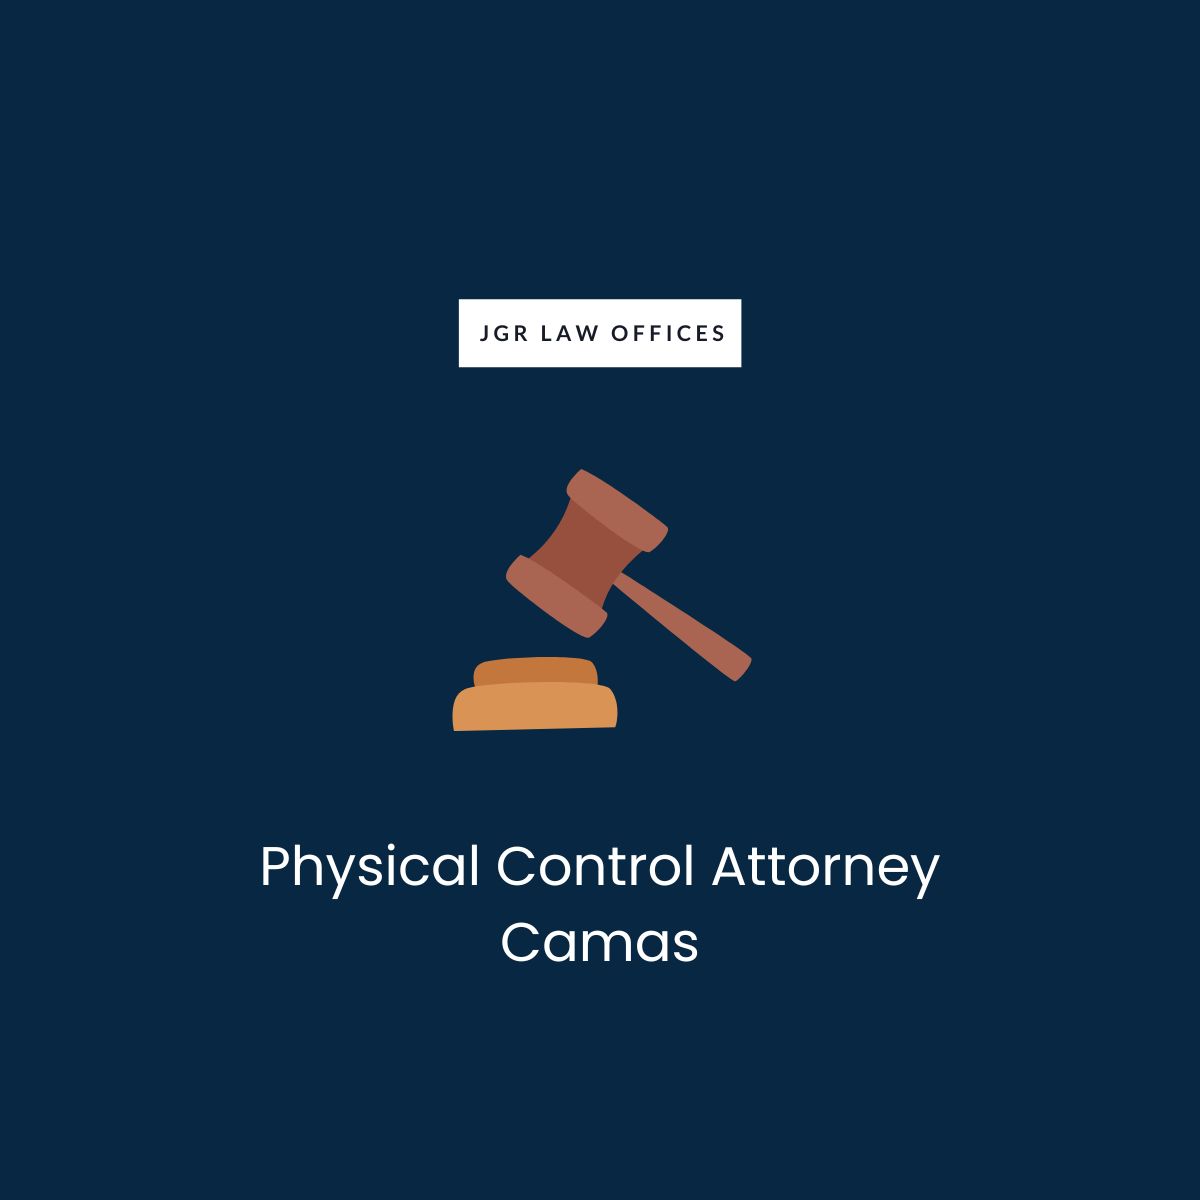 Physical Control Lawyer Camas Physical Control Physical Control